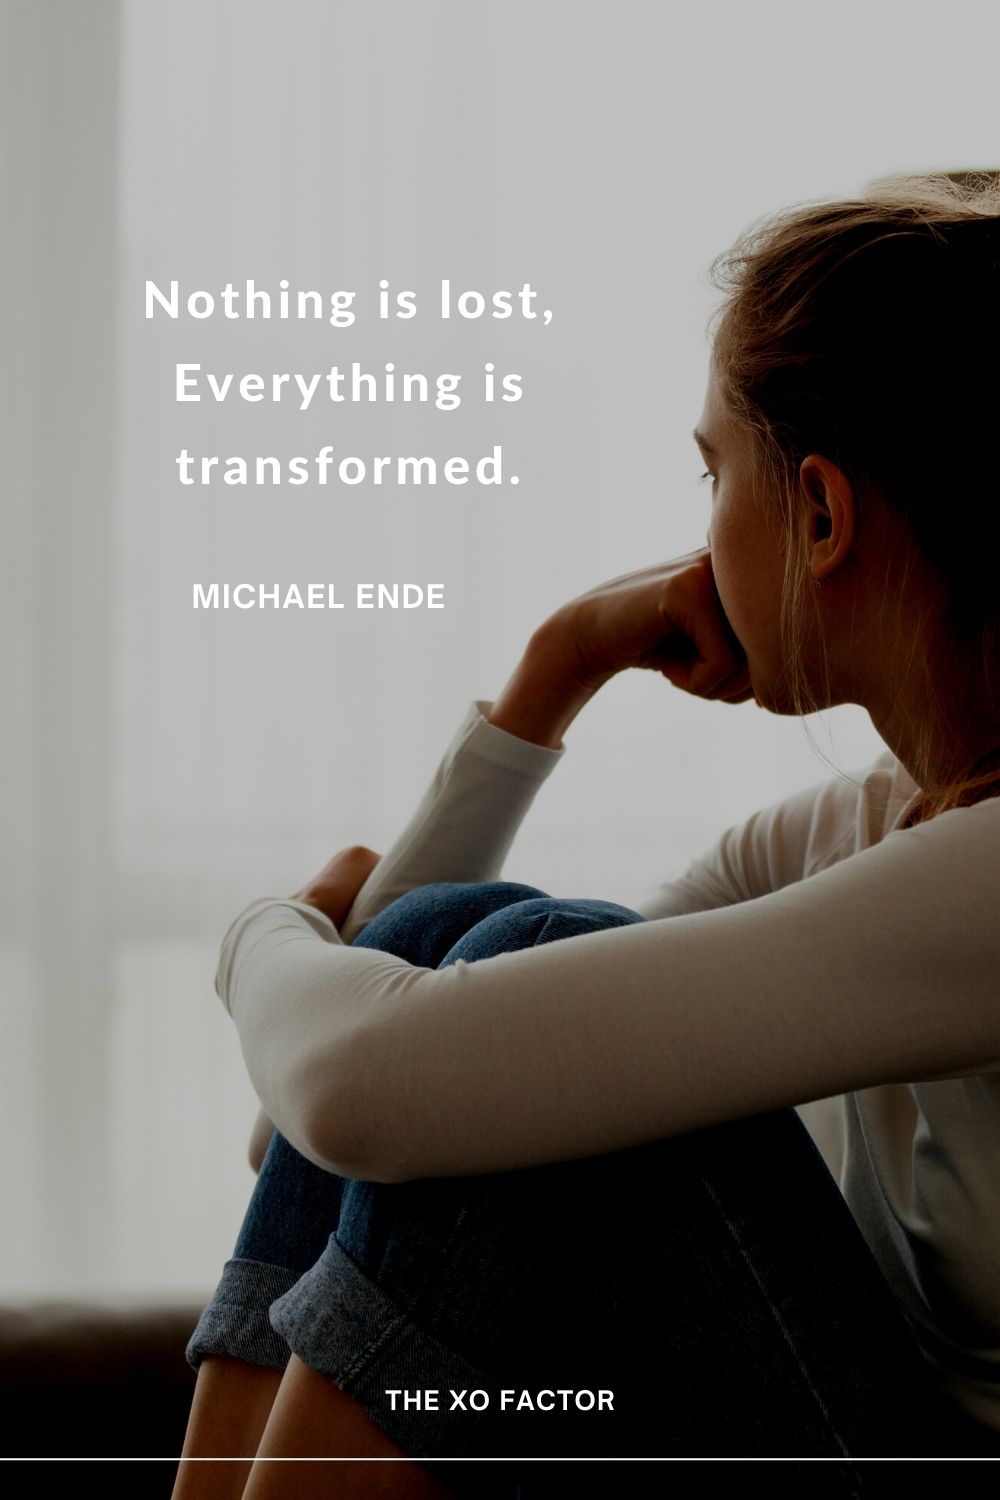 Nothing is lost, Everything is transformed.